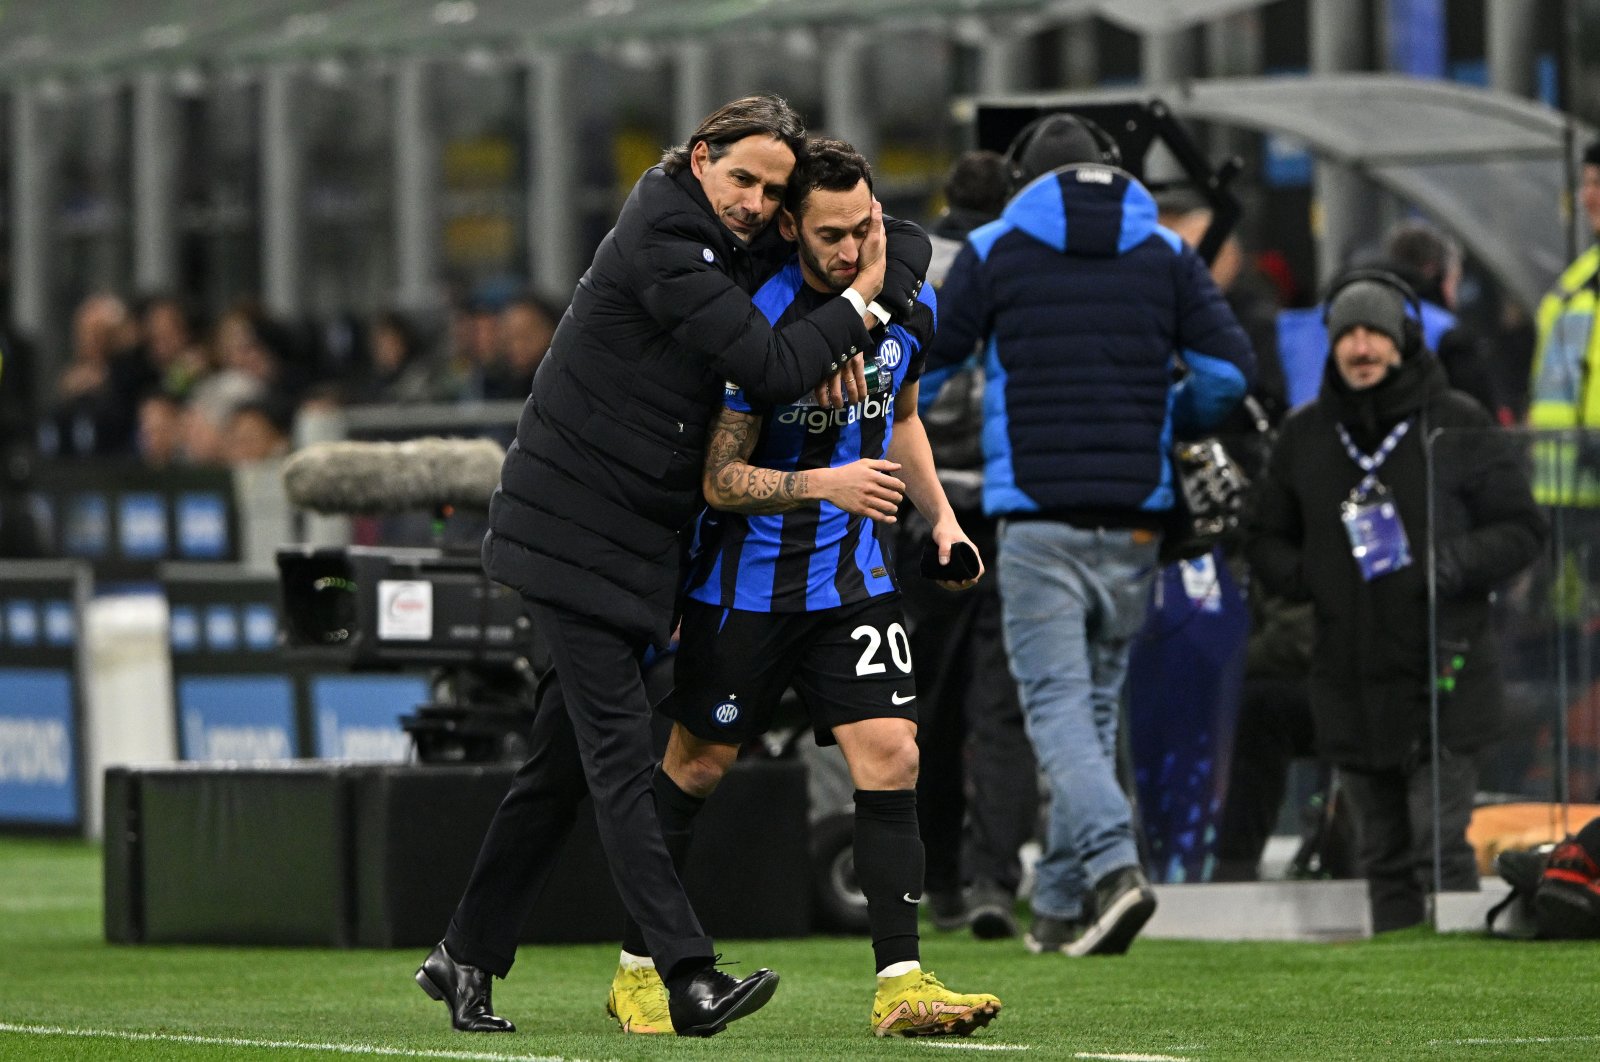 Inzaghi on hot seat as Inter attempt to shake off woes at Porto